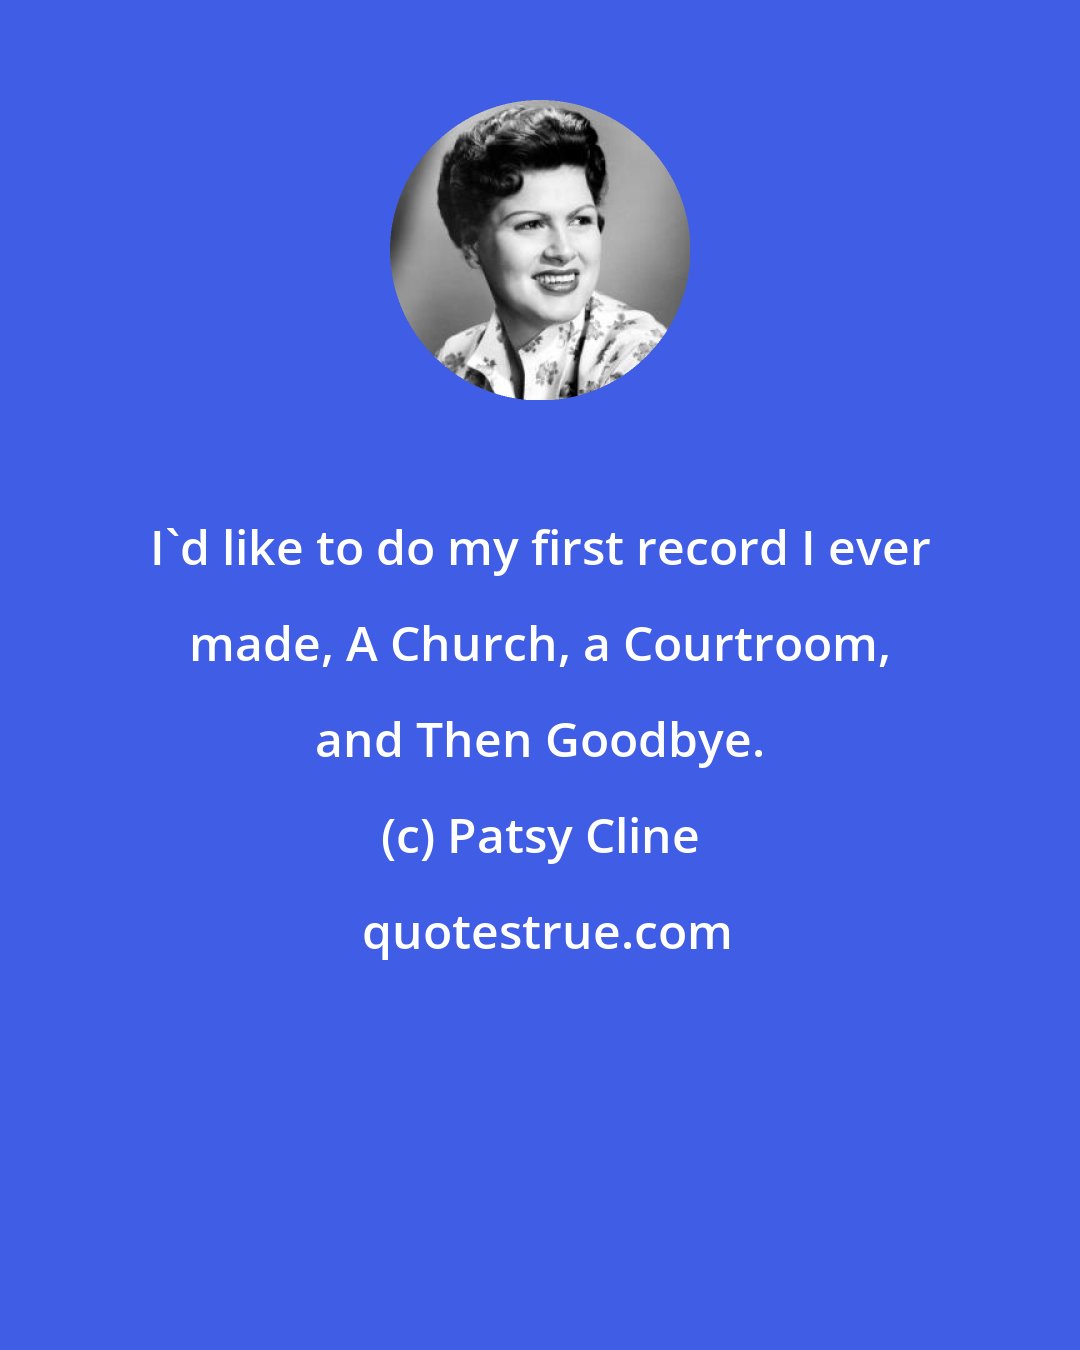 Patsy Cline: I'd like to do my first record I ever made, A Church, a Courtroom, and Then Goodbye.